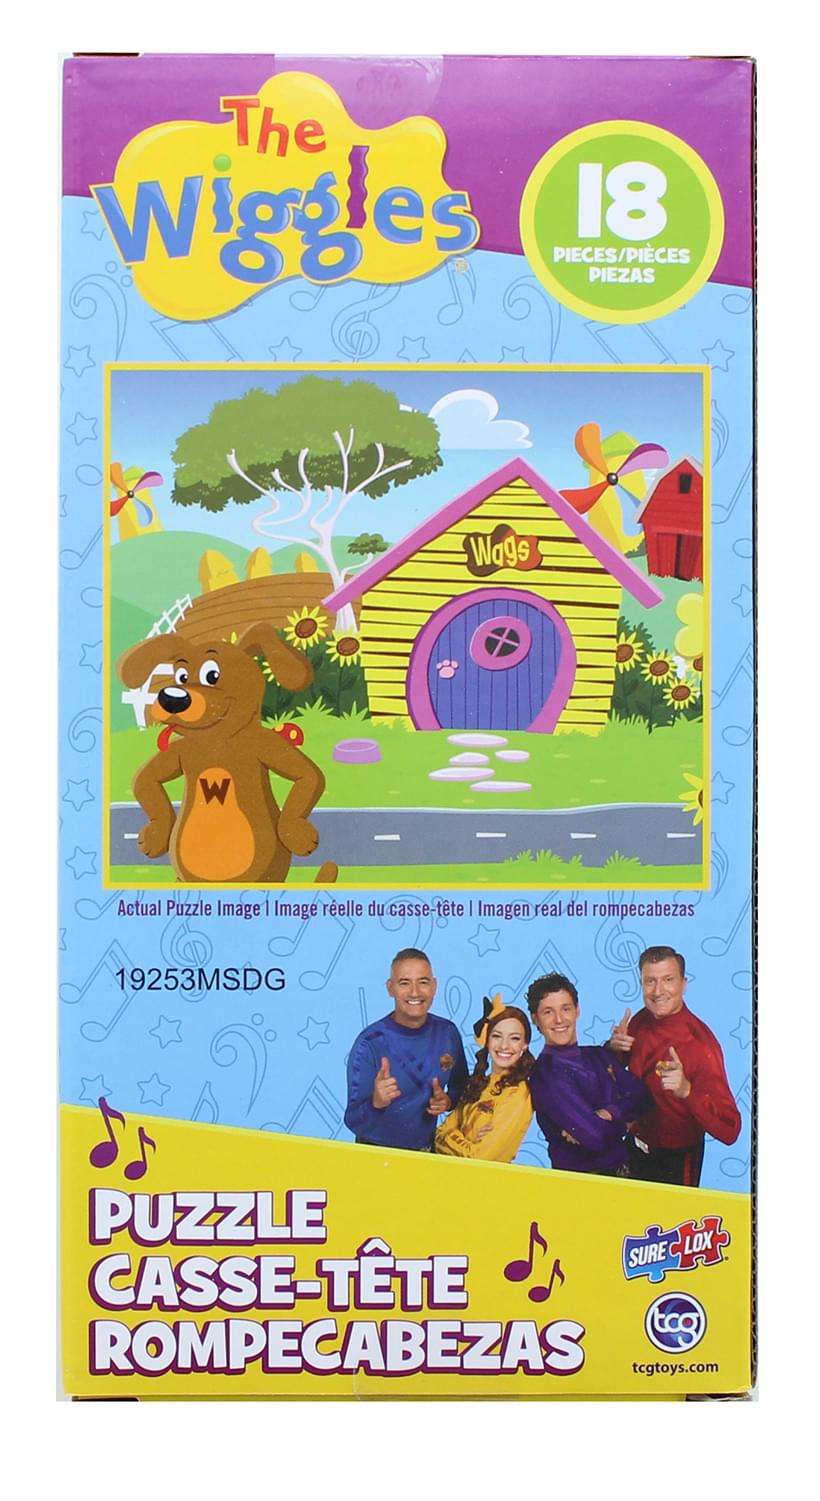 The Wiggles Wags 18 Piece Jigsaw Puzzle